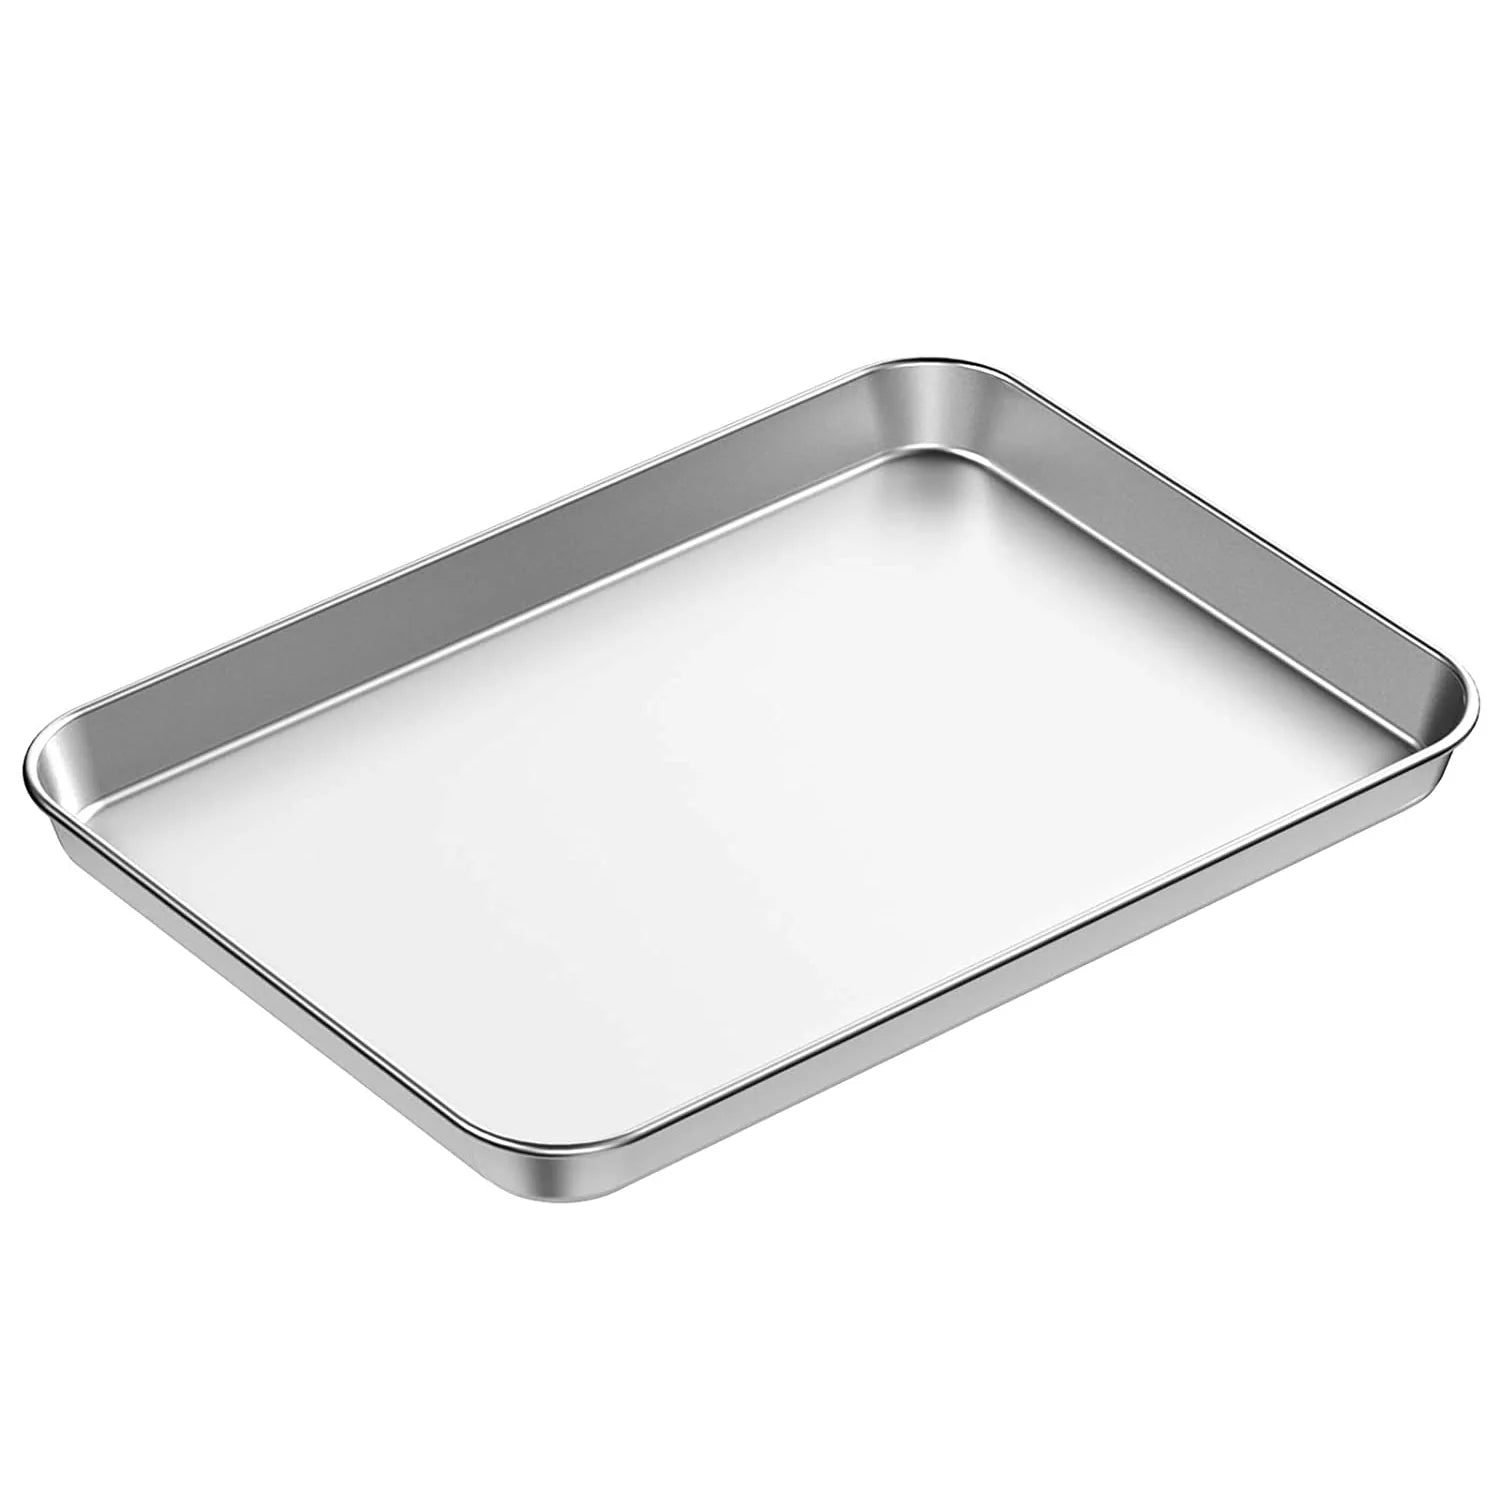 18x13-in Commercial Grade Stainless Steel Baking Sheet Tray with